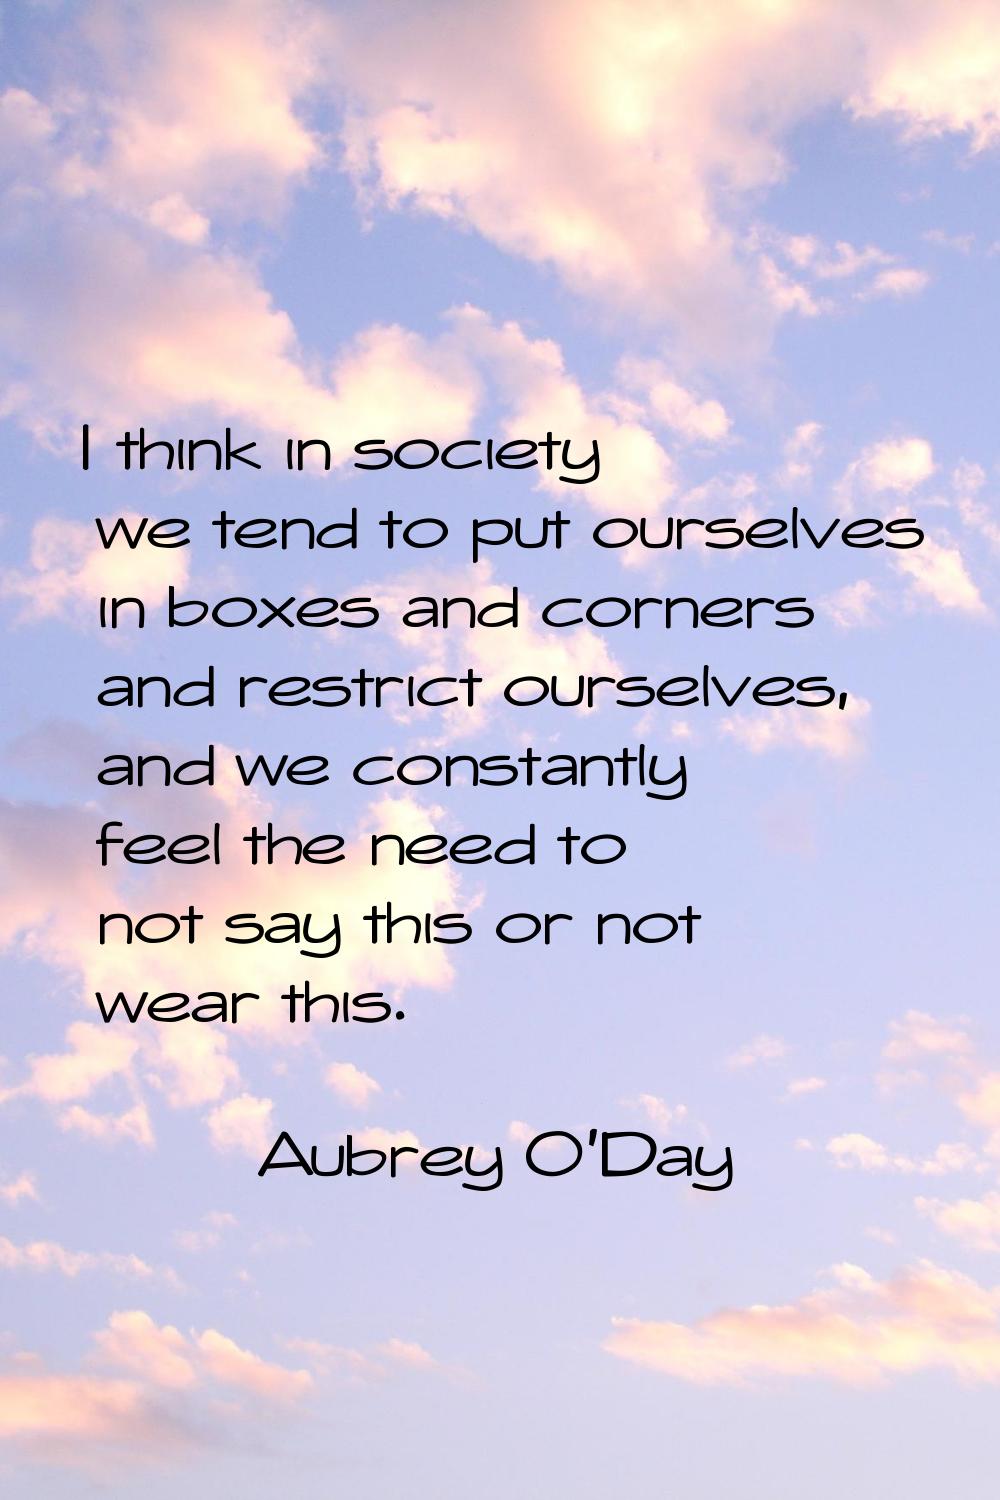 I think in society we tend to put ourselves in boxes and corners and restrict ourselves, and we con